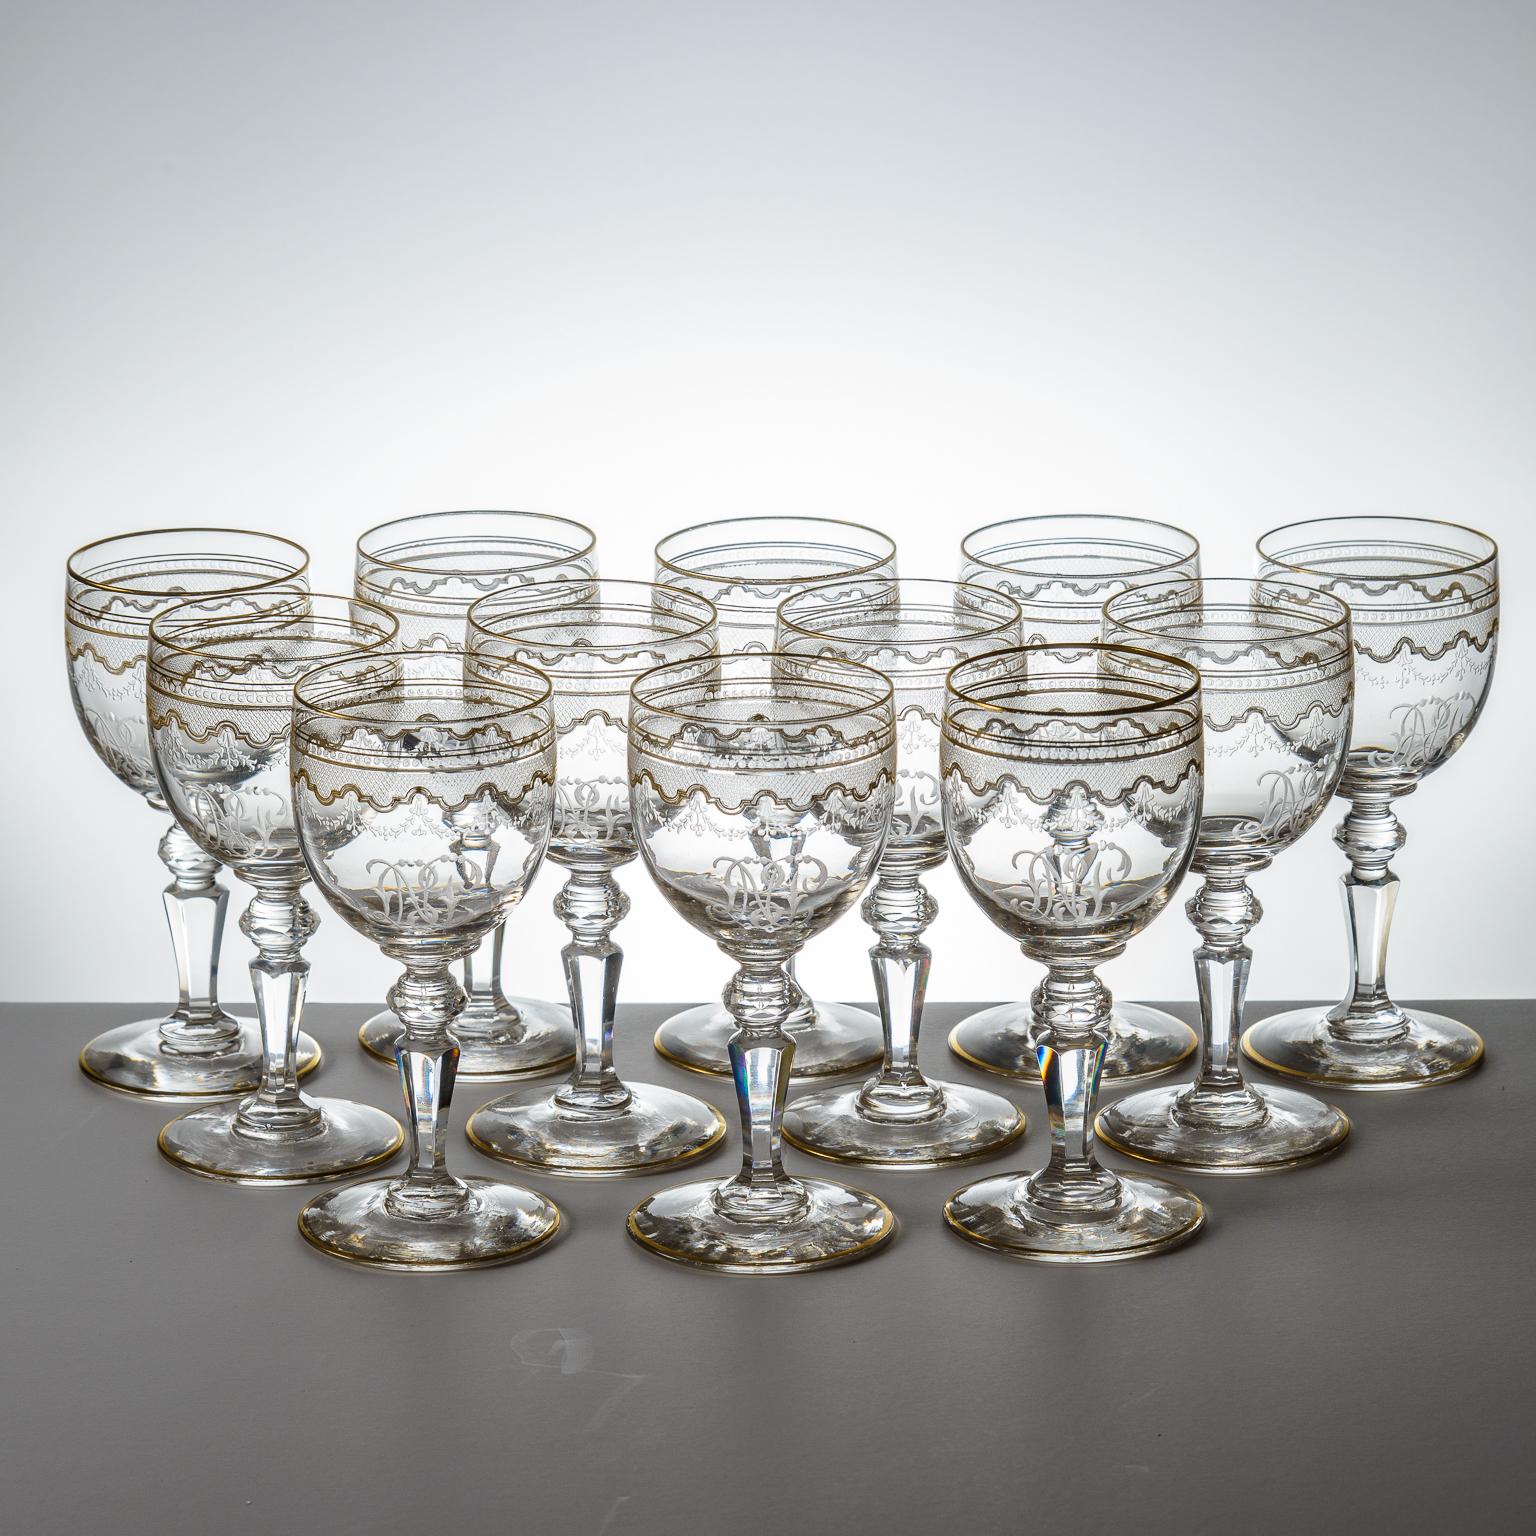 Early 20th Century 12 Saint Louis Gilt Decorated Wine Glasses With Cut Knob Stems, Antique For Sale